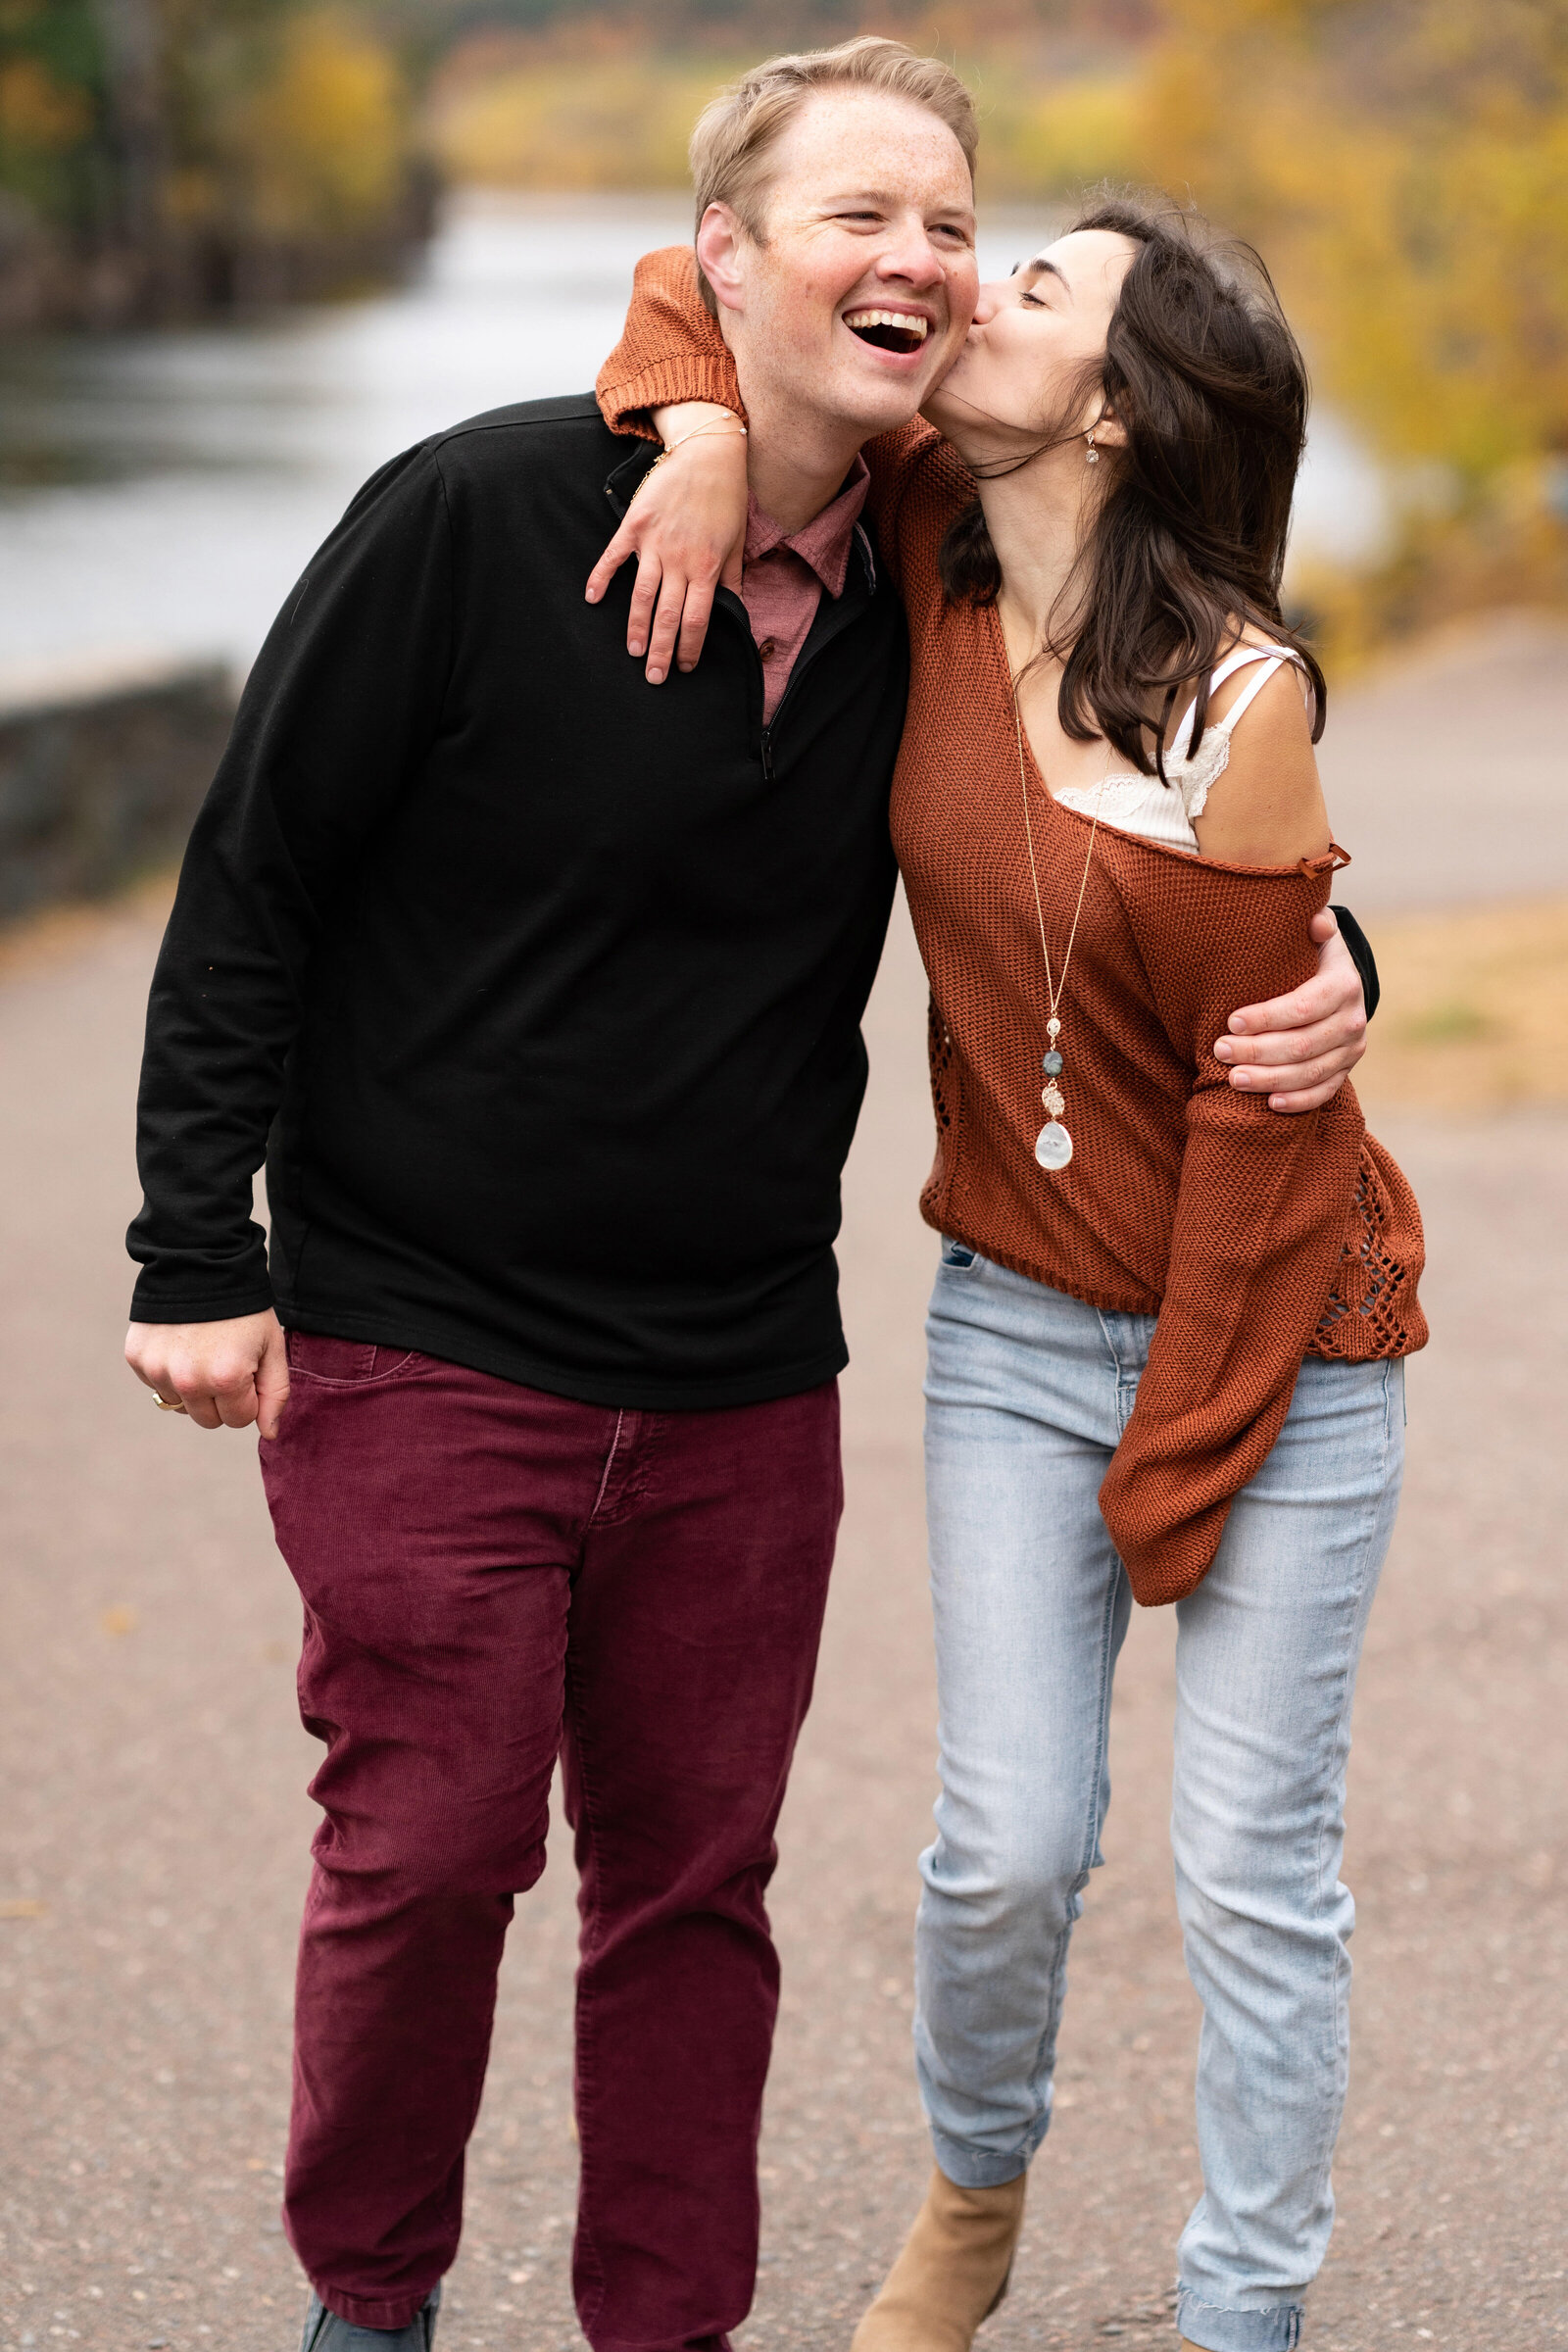 Annalyse and Brent - Minnesota Engagement Photography - Taylor's Falls - Sunrise Engagement Photos - RKH Images (351 of 408)